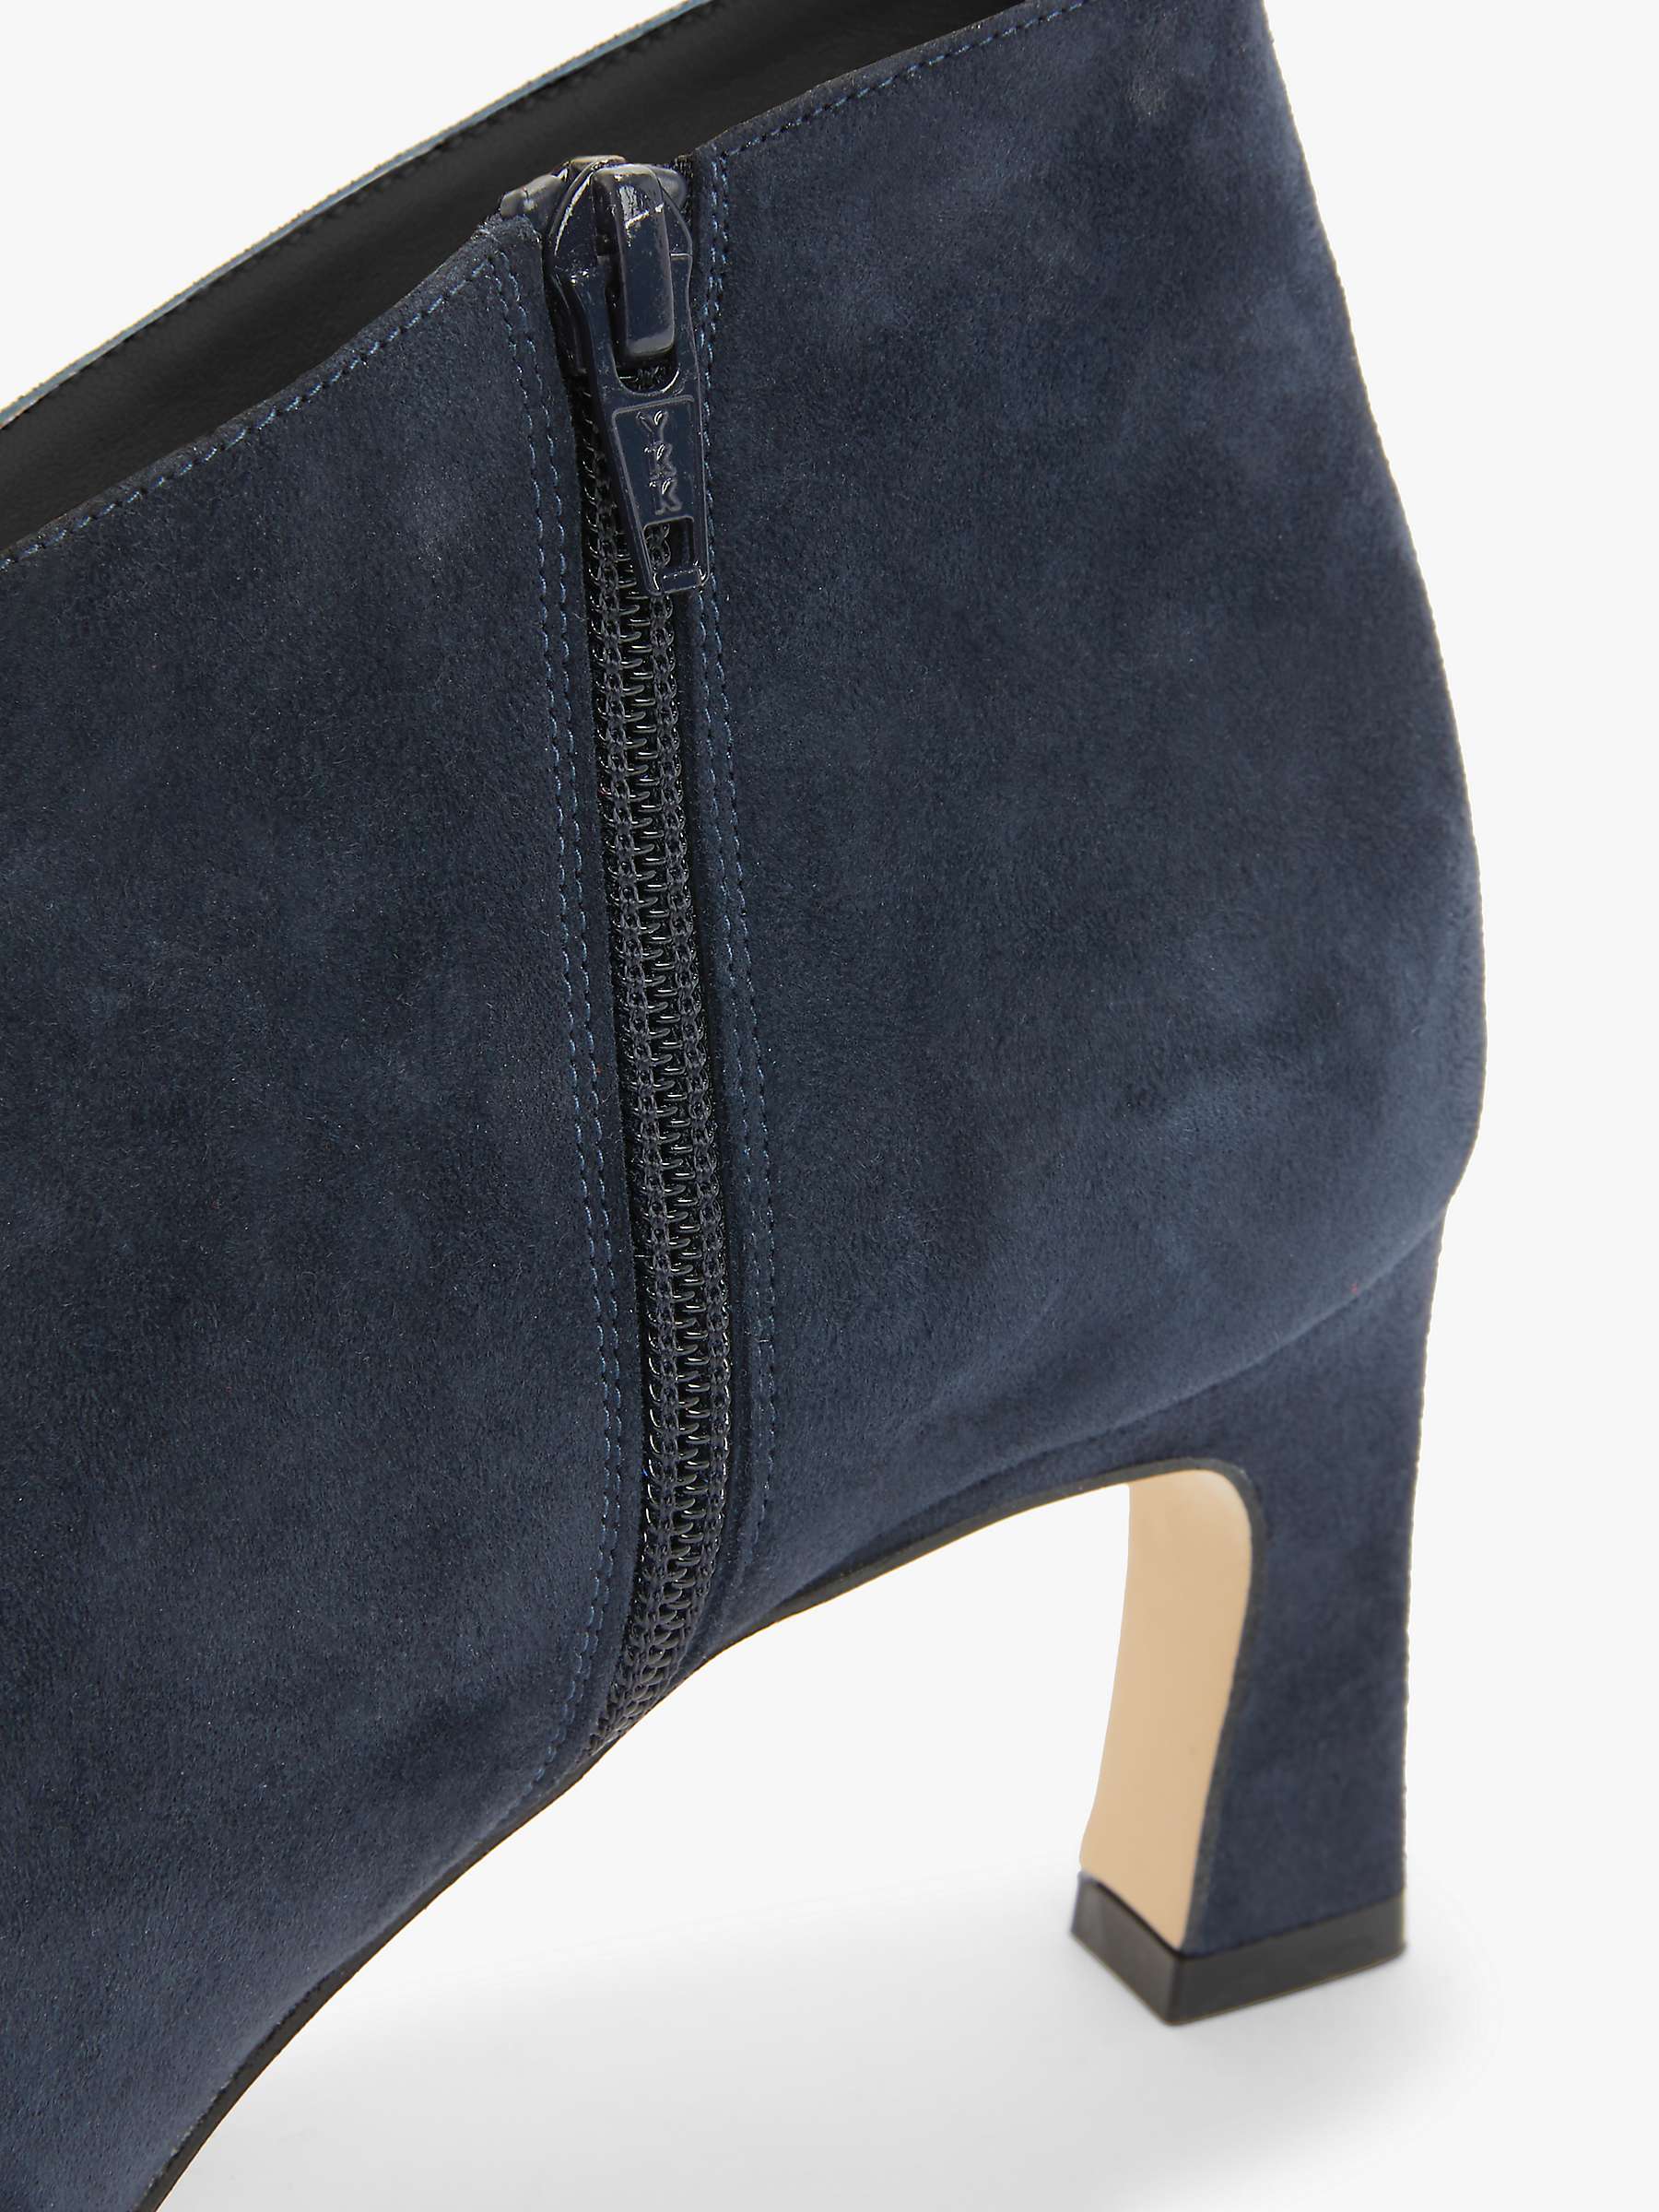 Buy John Lewis Waverly Suede Shoe Boots, Navy Online at johnlewis.com